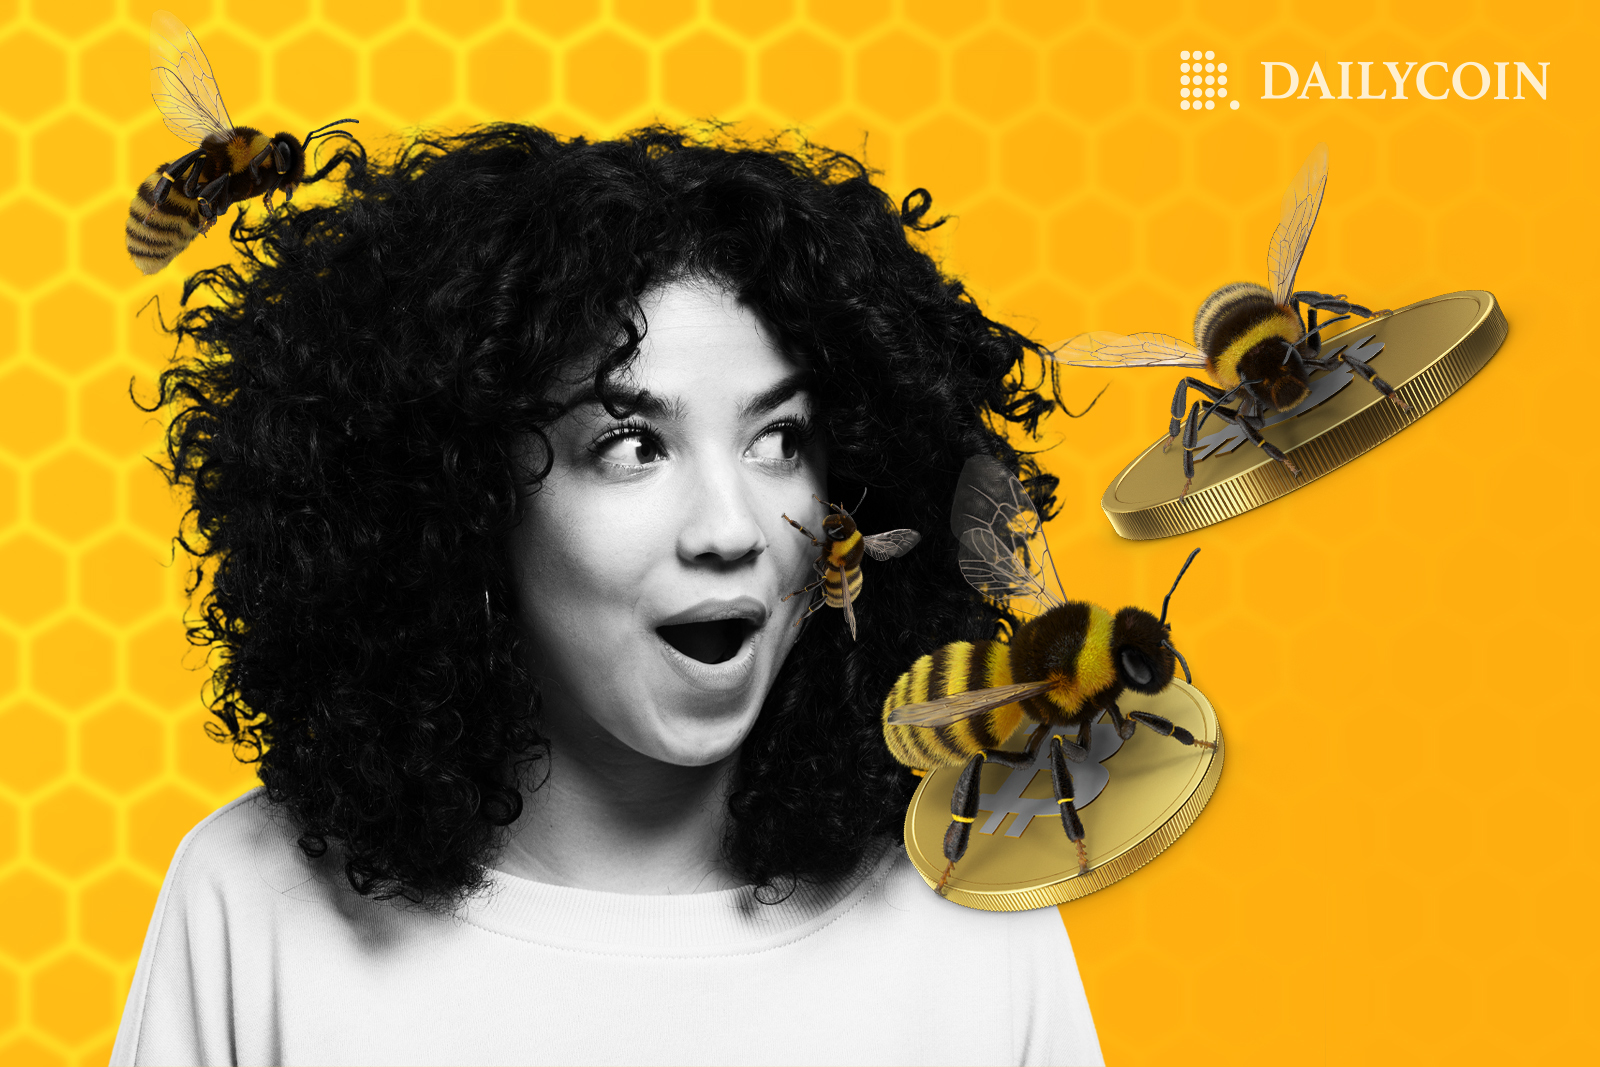 A surprised woman surrounded by bees flying while carrying bitcoin.